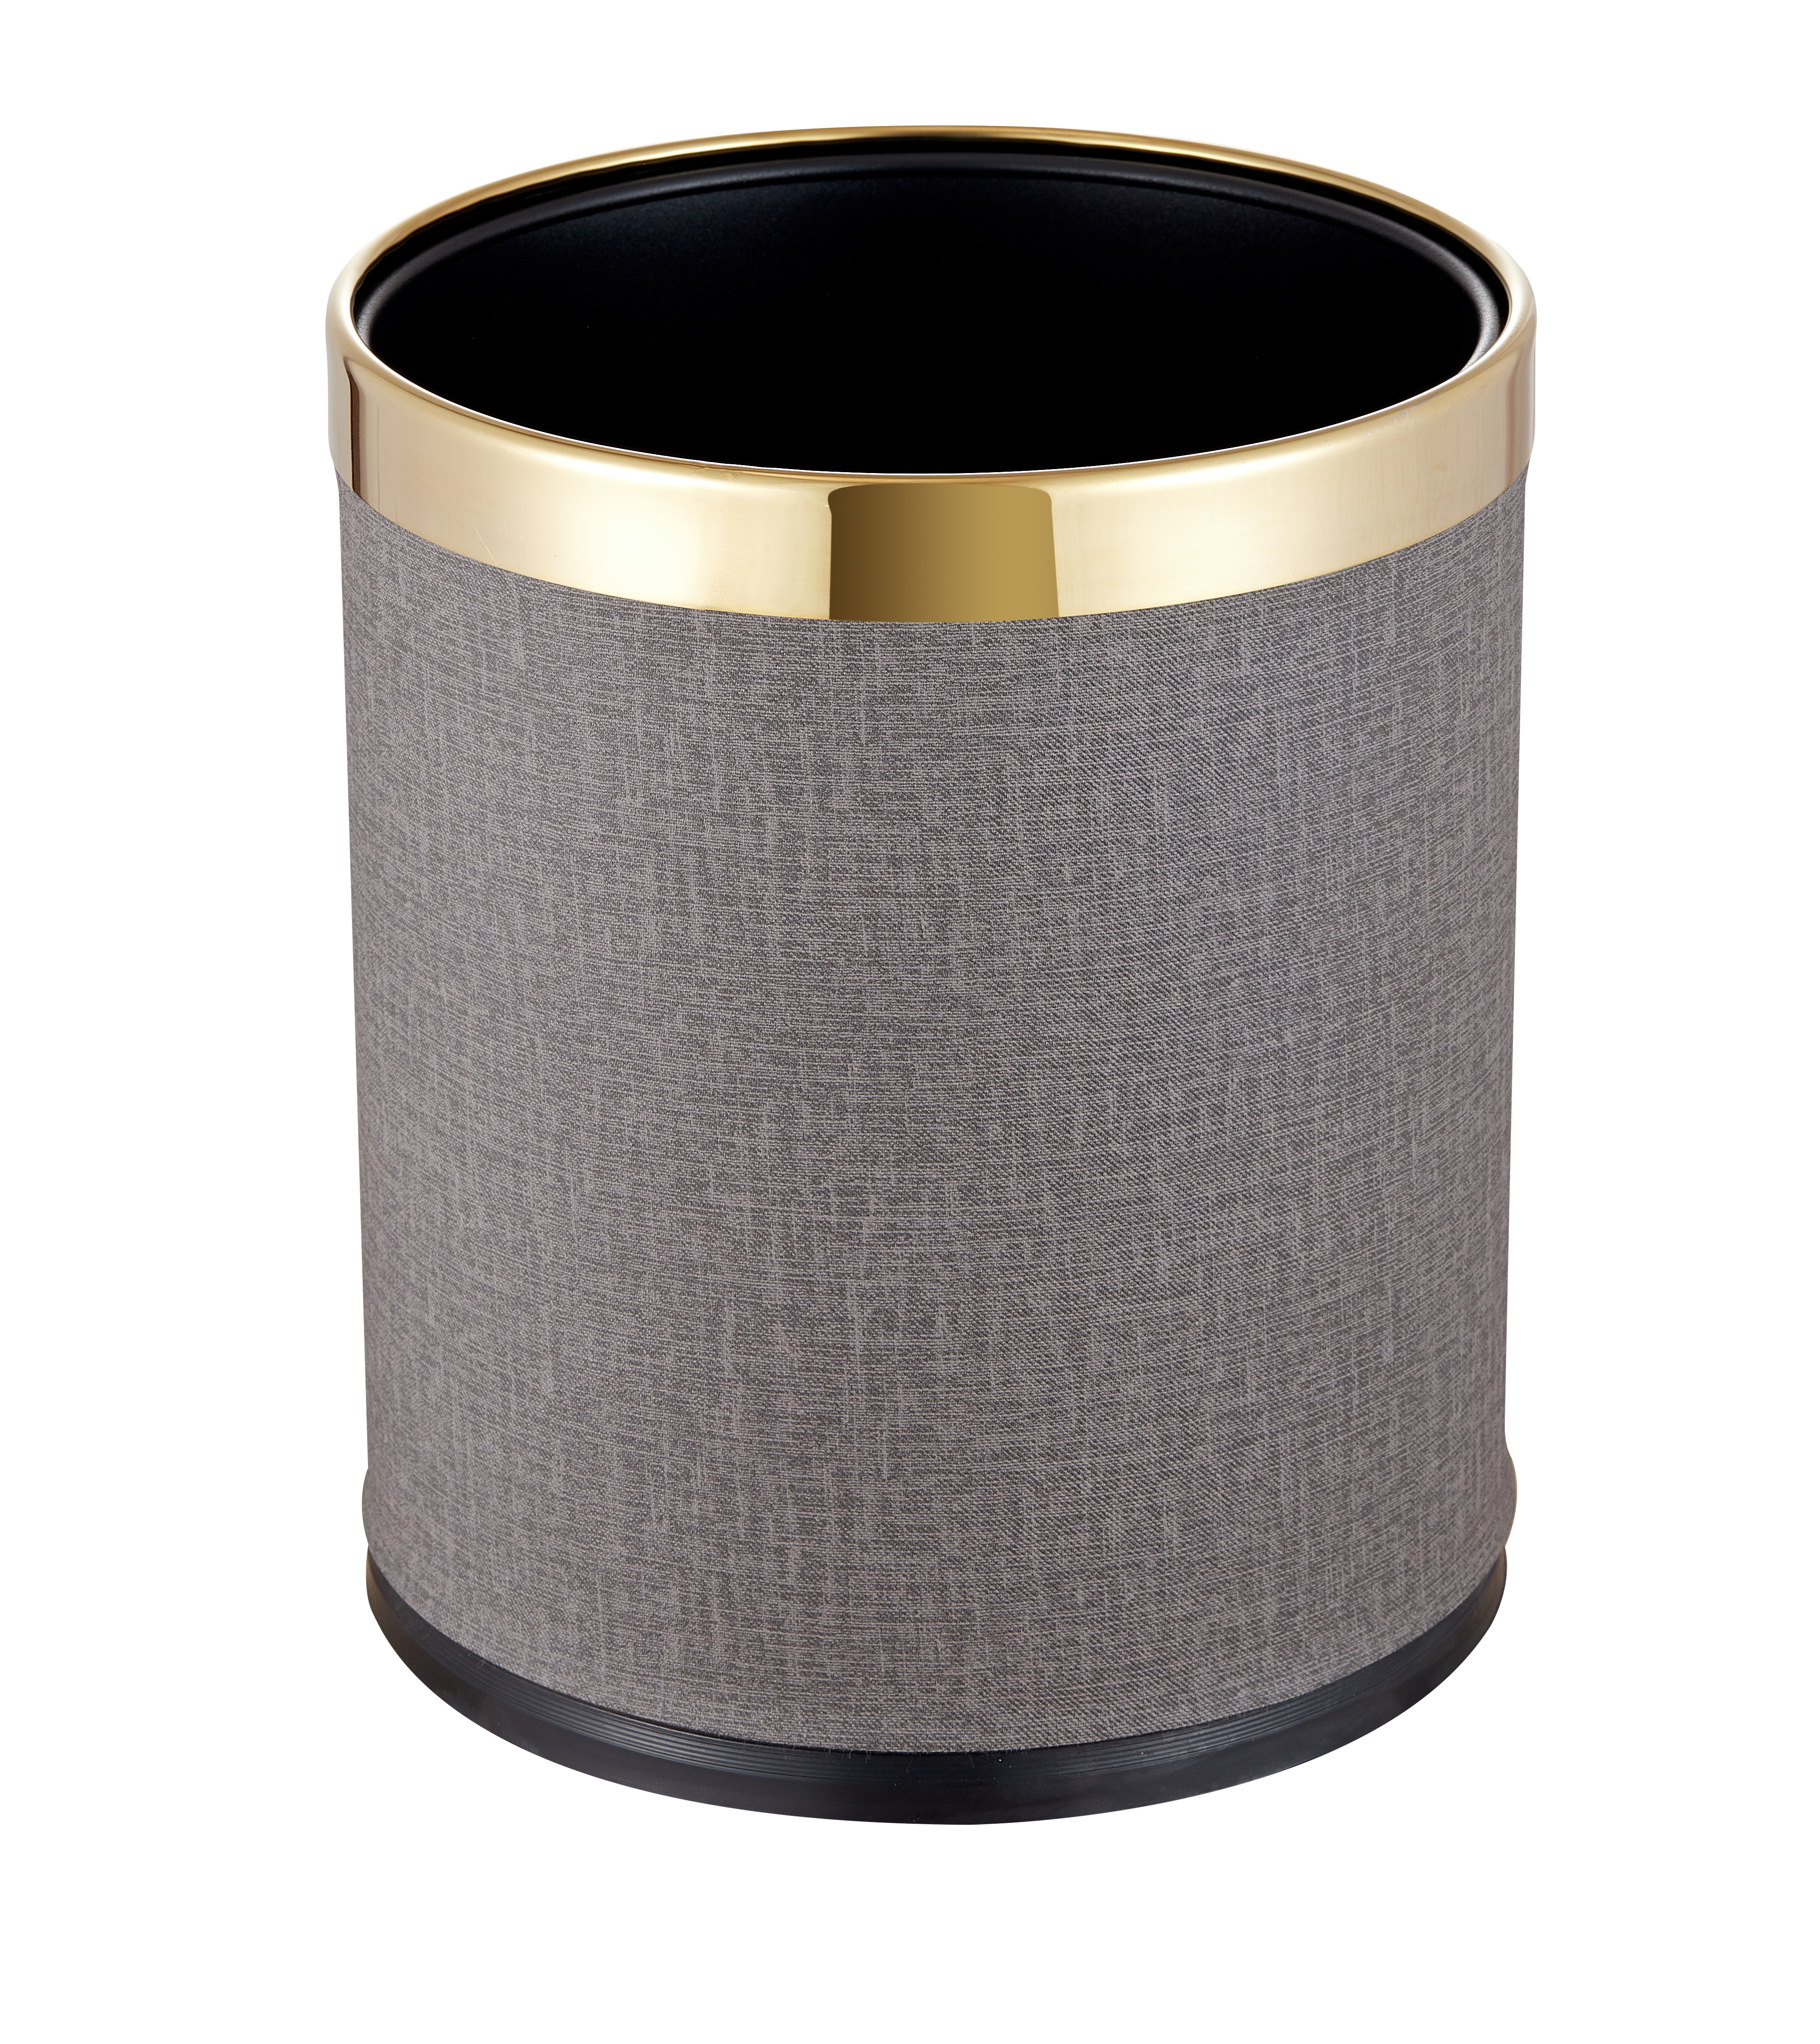 Doubly Layer Metal Trash Can With Leather Covered for Hotel Room (KL-06)